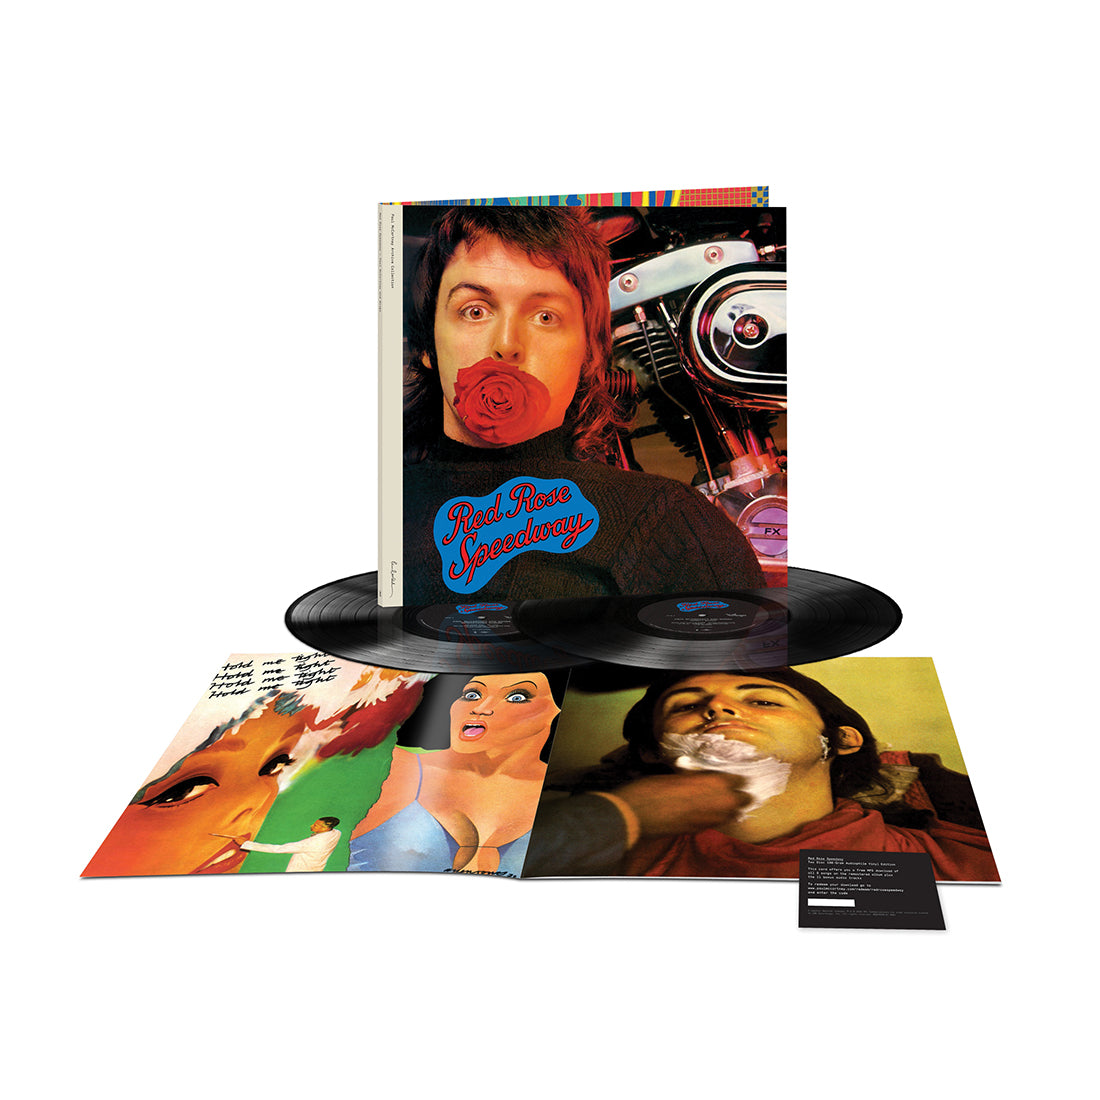 Paul McCartney & Wings - Red Rose Speedway - Special Edition 2LP